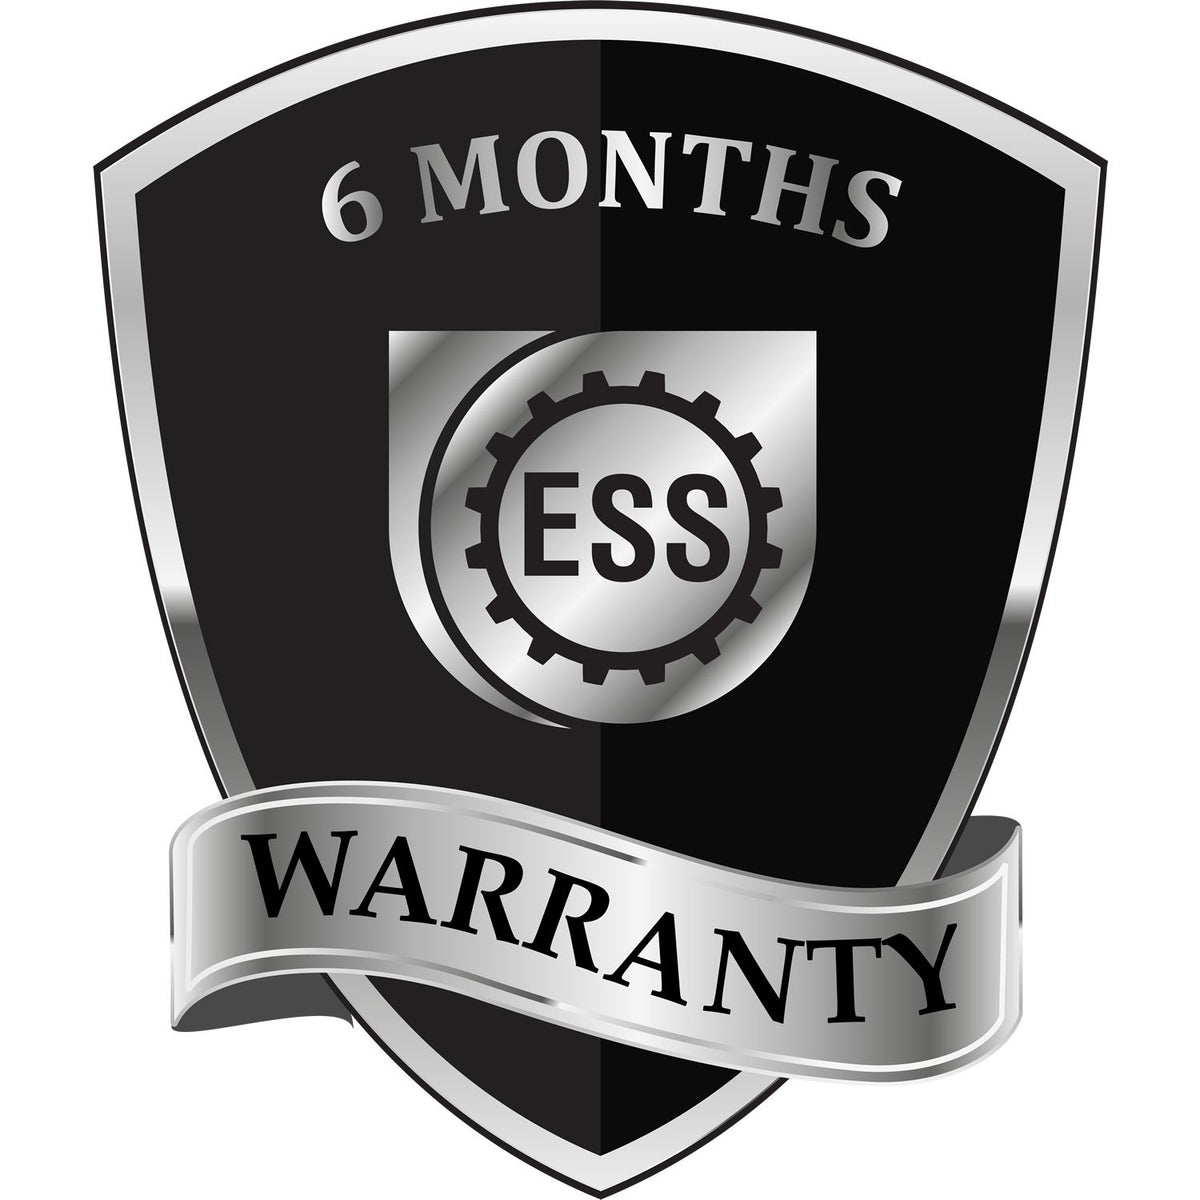 A badge or emblem showing a warranty icon for the Self-Inking Colorado PE Stamp